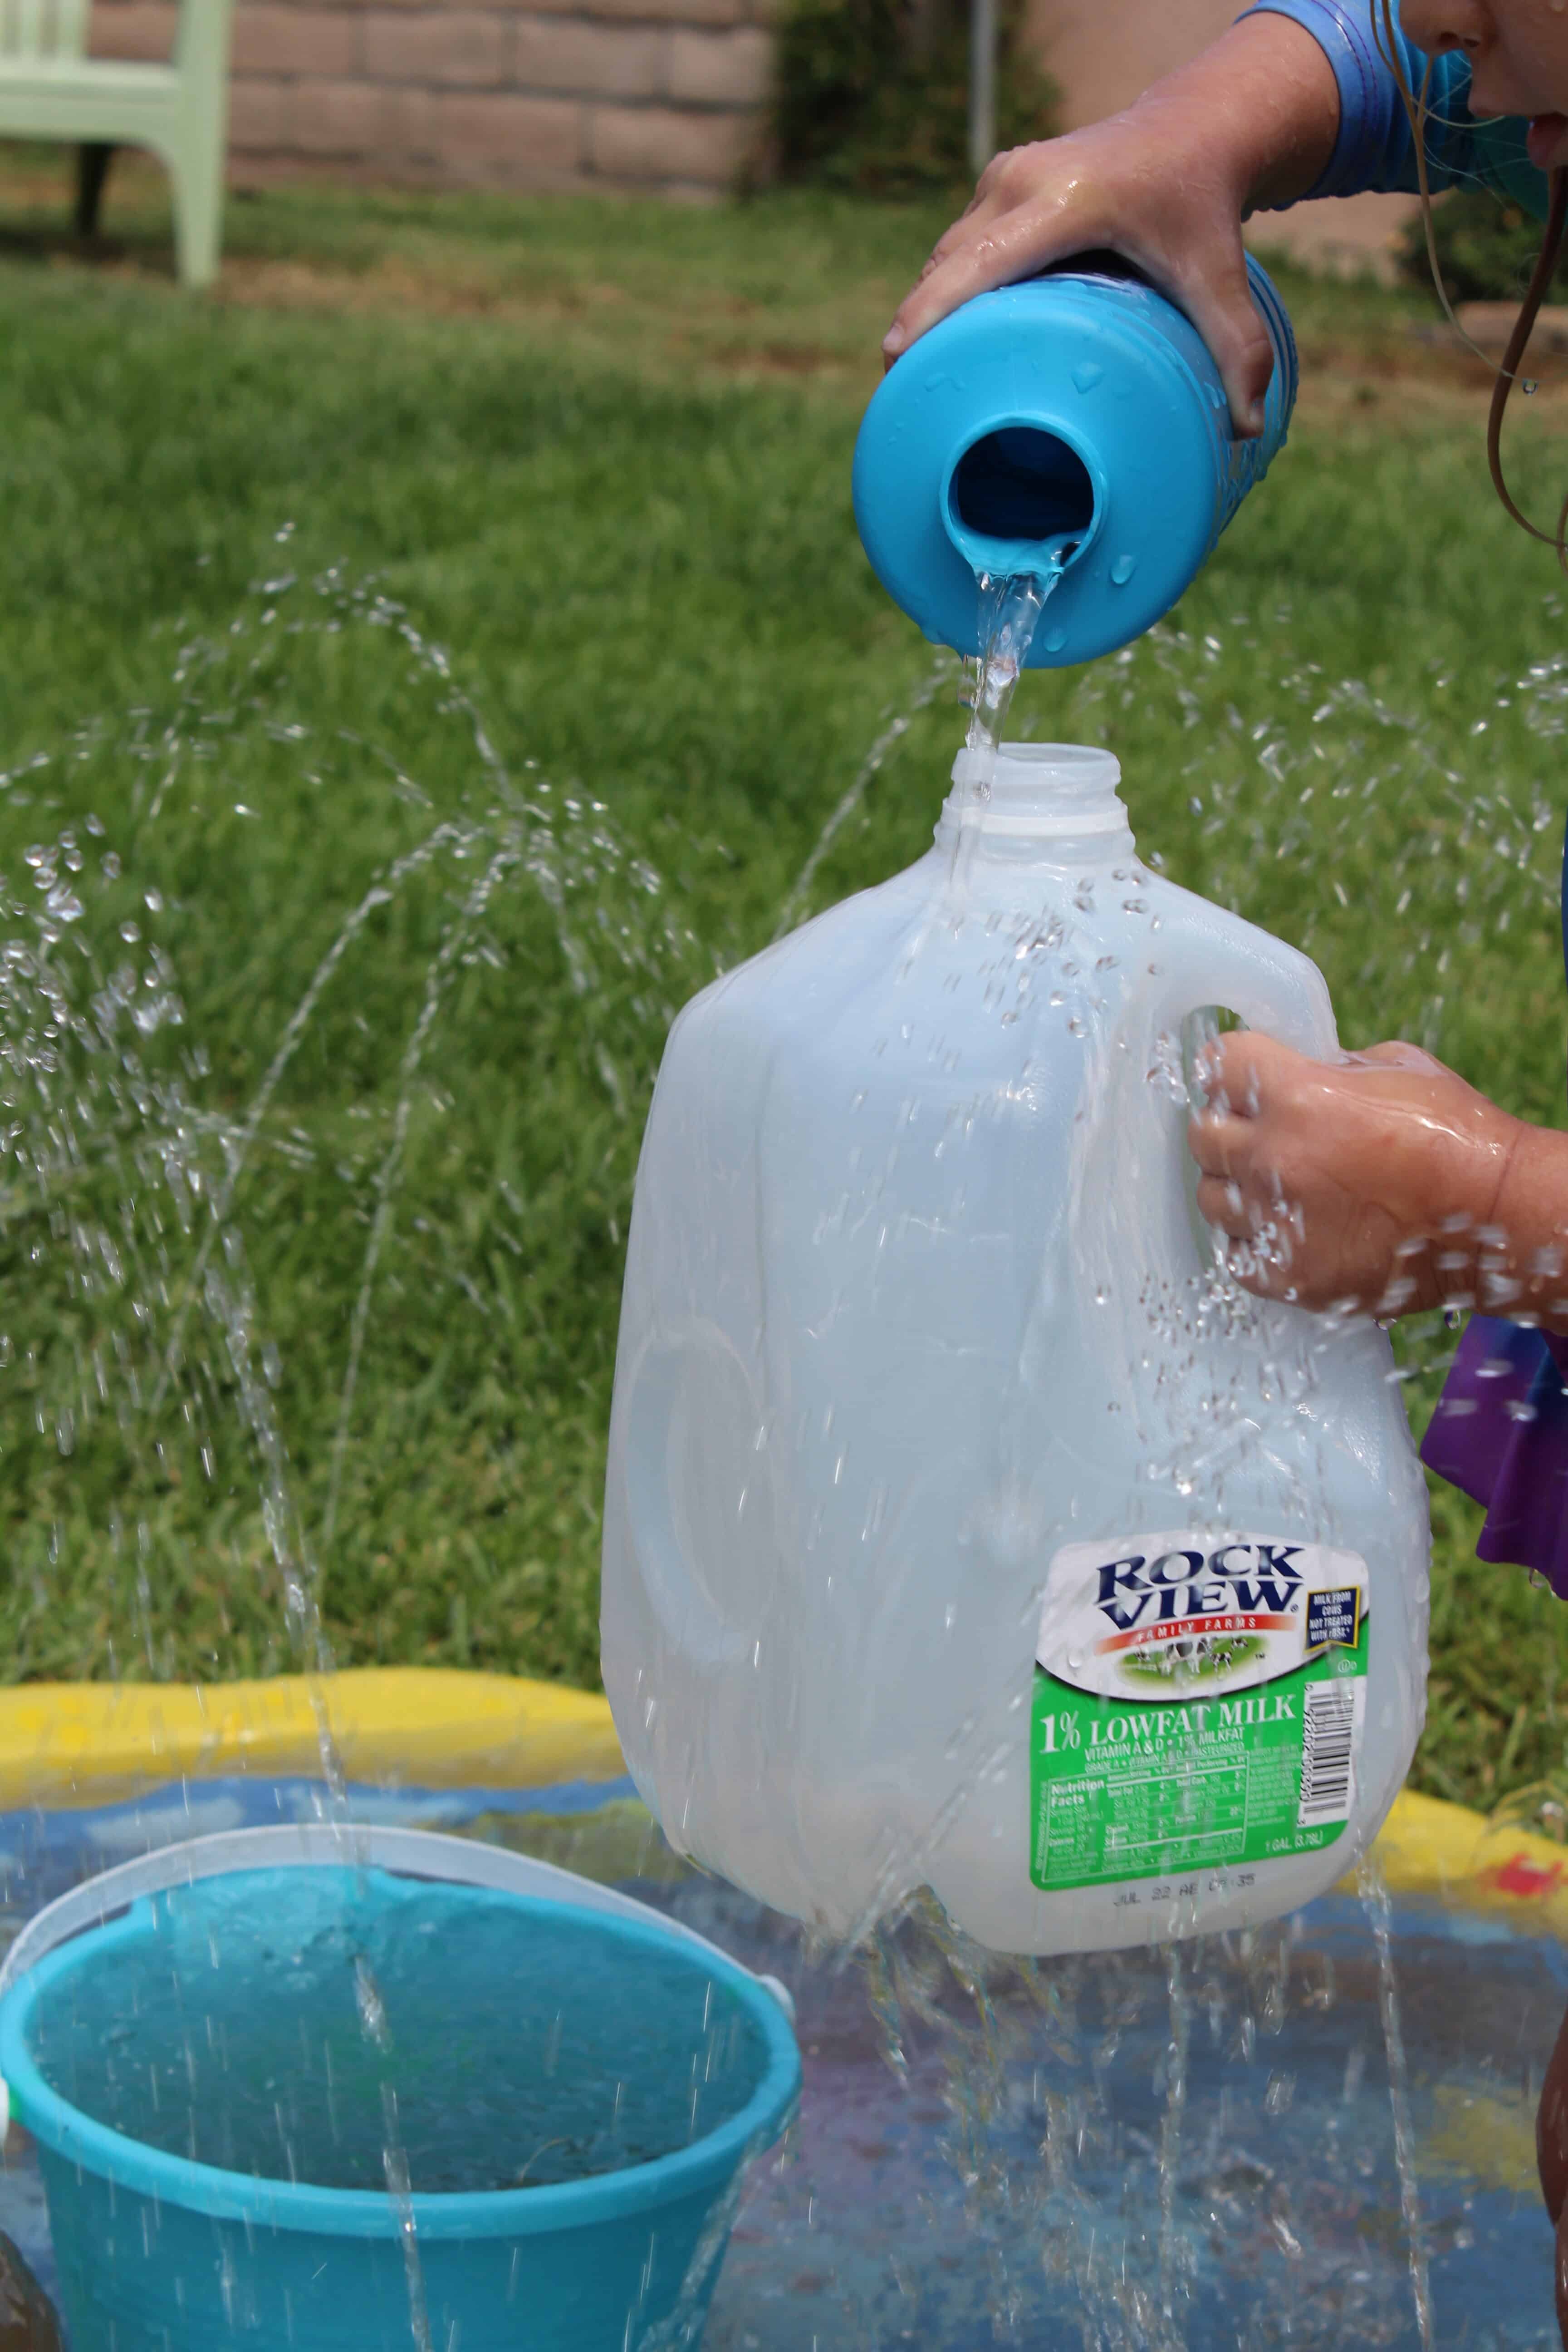 kids using milk jugs to play with water